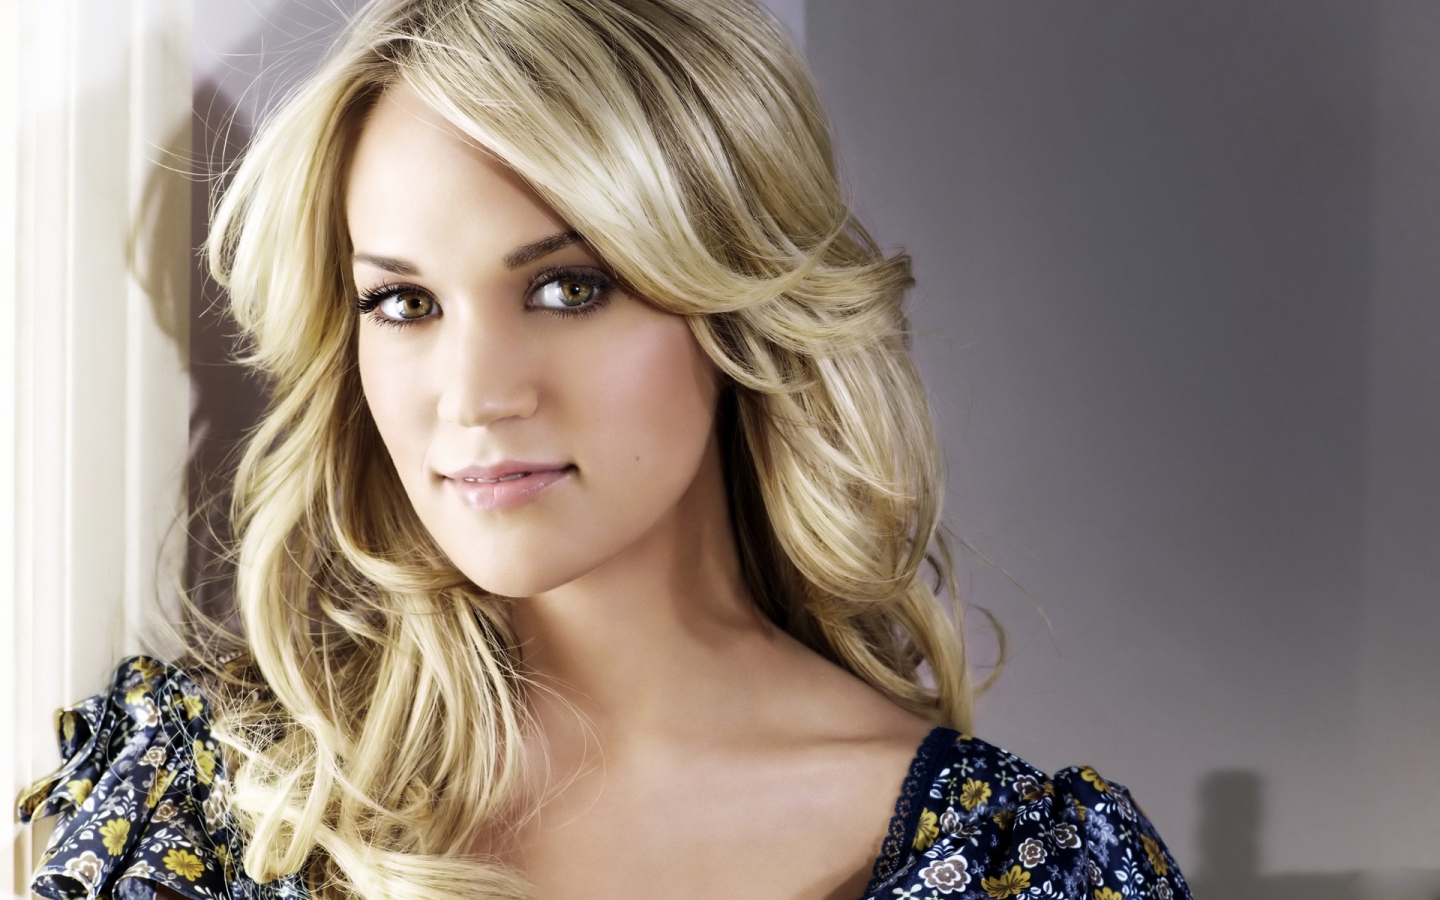 Amazing Carrie Underwood for 1440 x 900 widescreen resolution